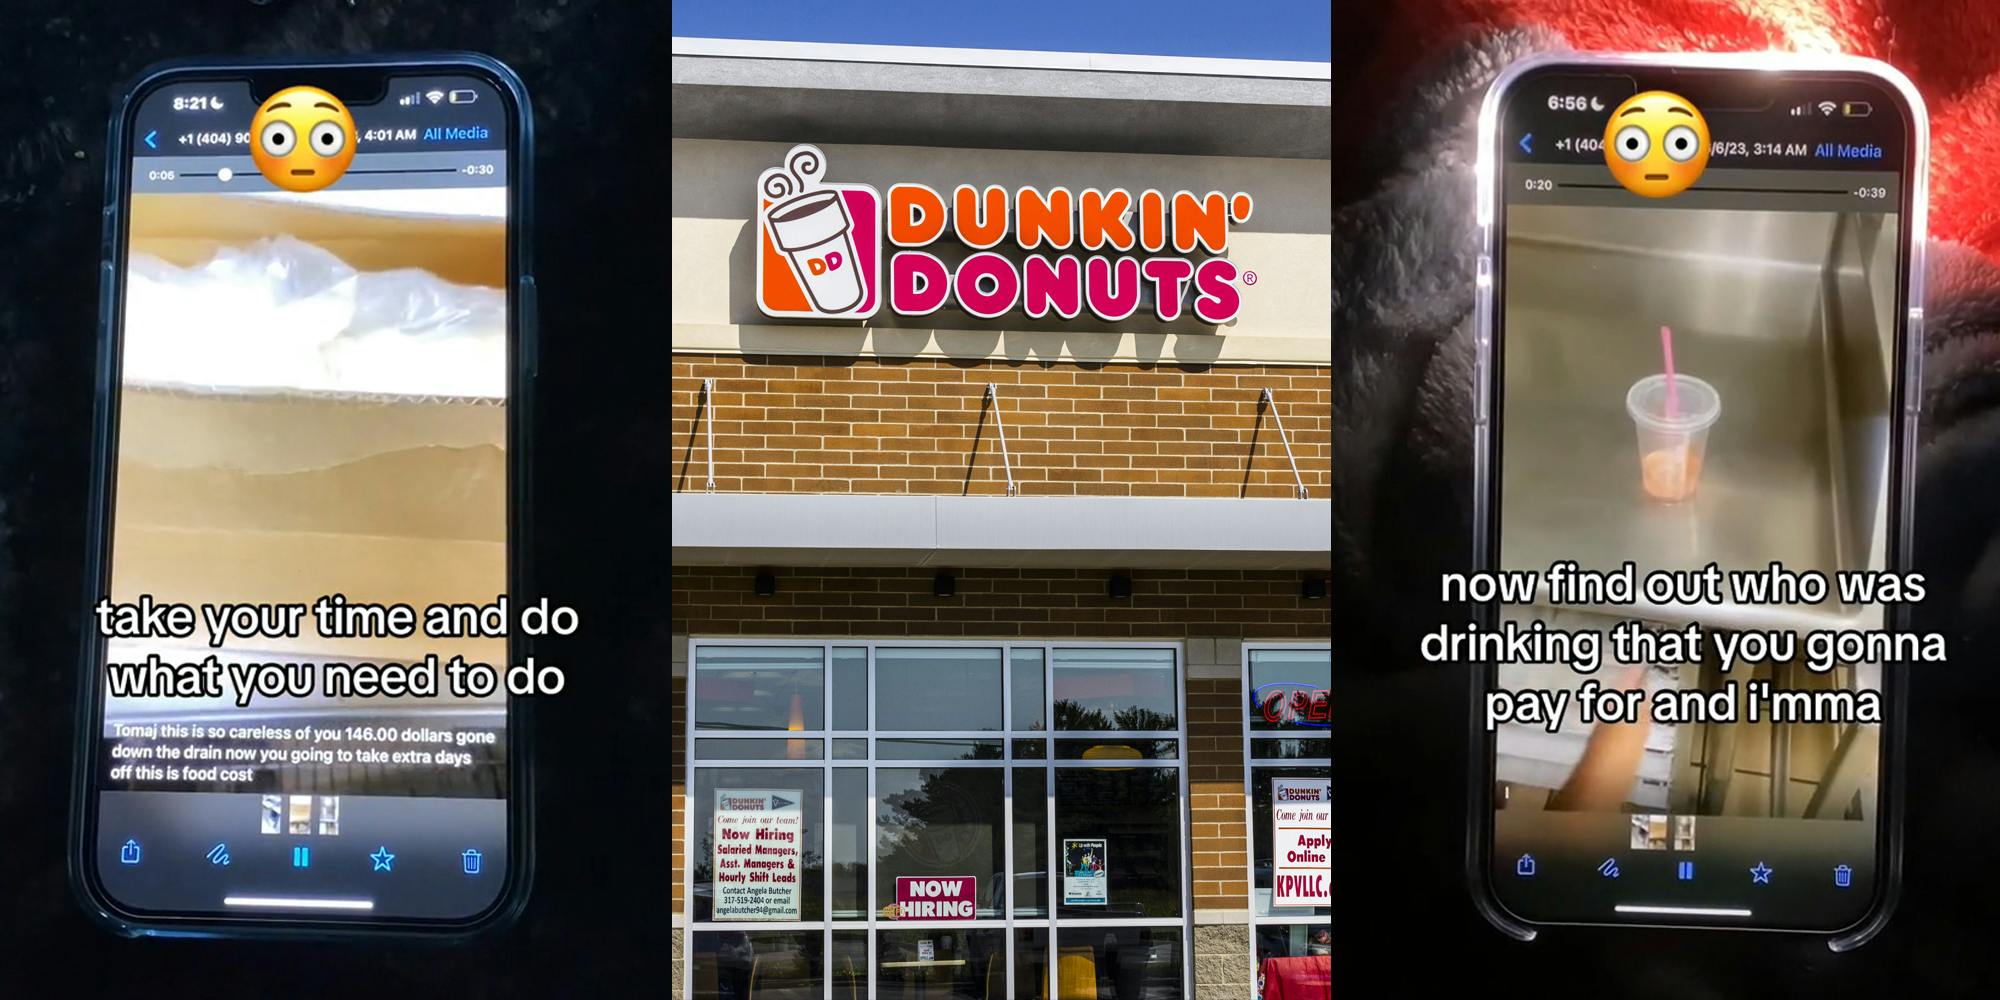 video of Dunkin' manager speaking on phone with caption "take your time and do what you need to do" (l) Dunkin' Donut's building with sign (c) video of Dunkin' manager speaking on phone with caption "now find out who was drinking that you gonna pay for it and i'mma" (r)